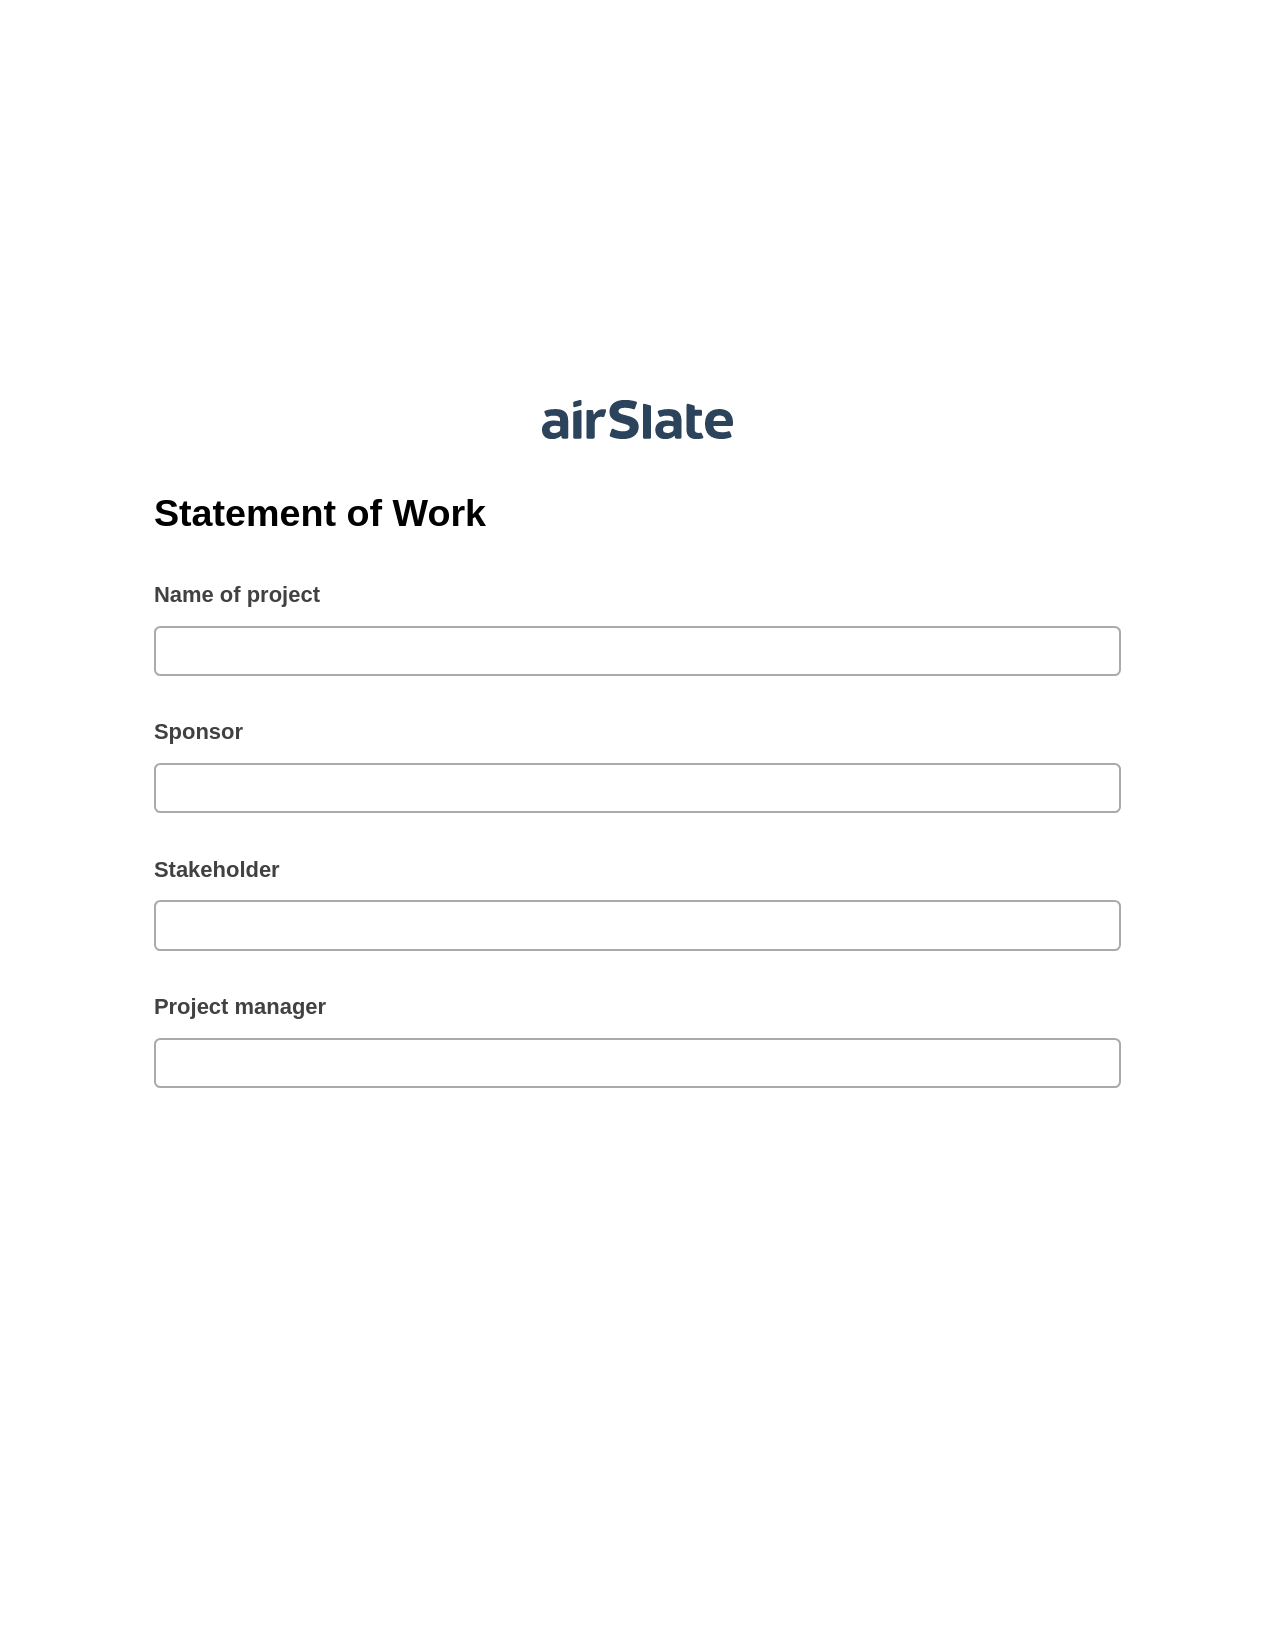 Statement of Work Pre-fill from Google Sheets Bot, Reminder Bot, Box Bot